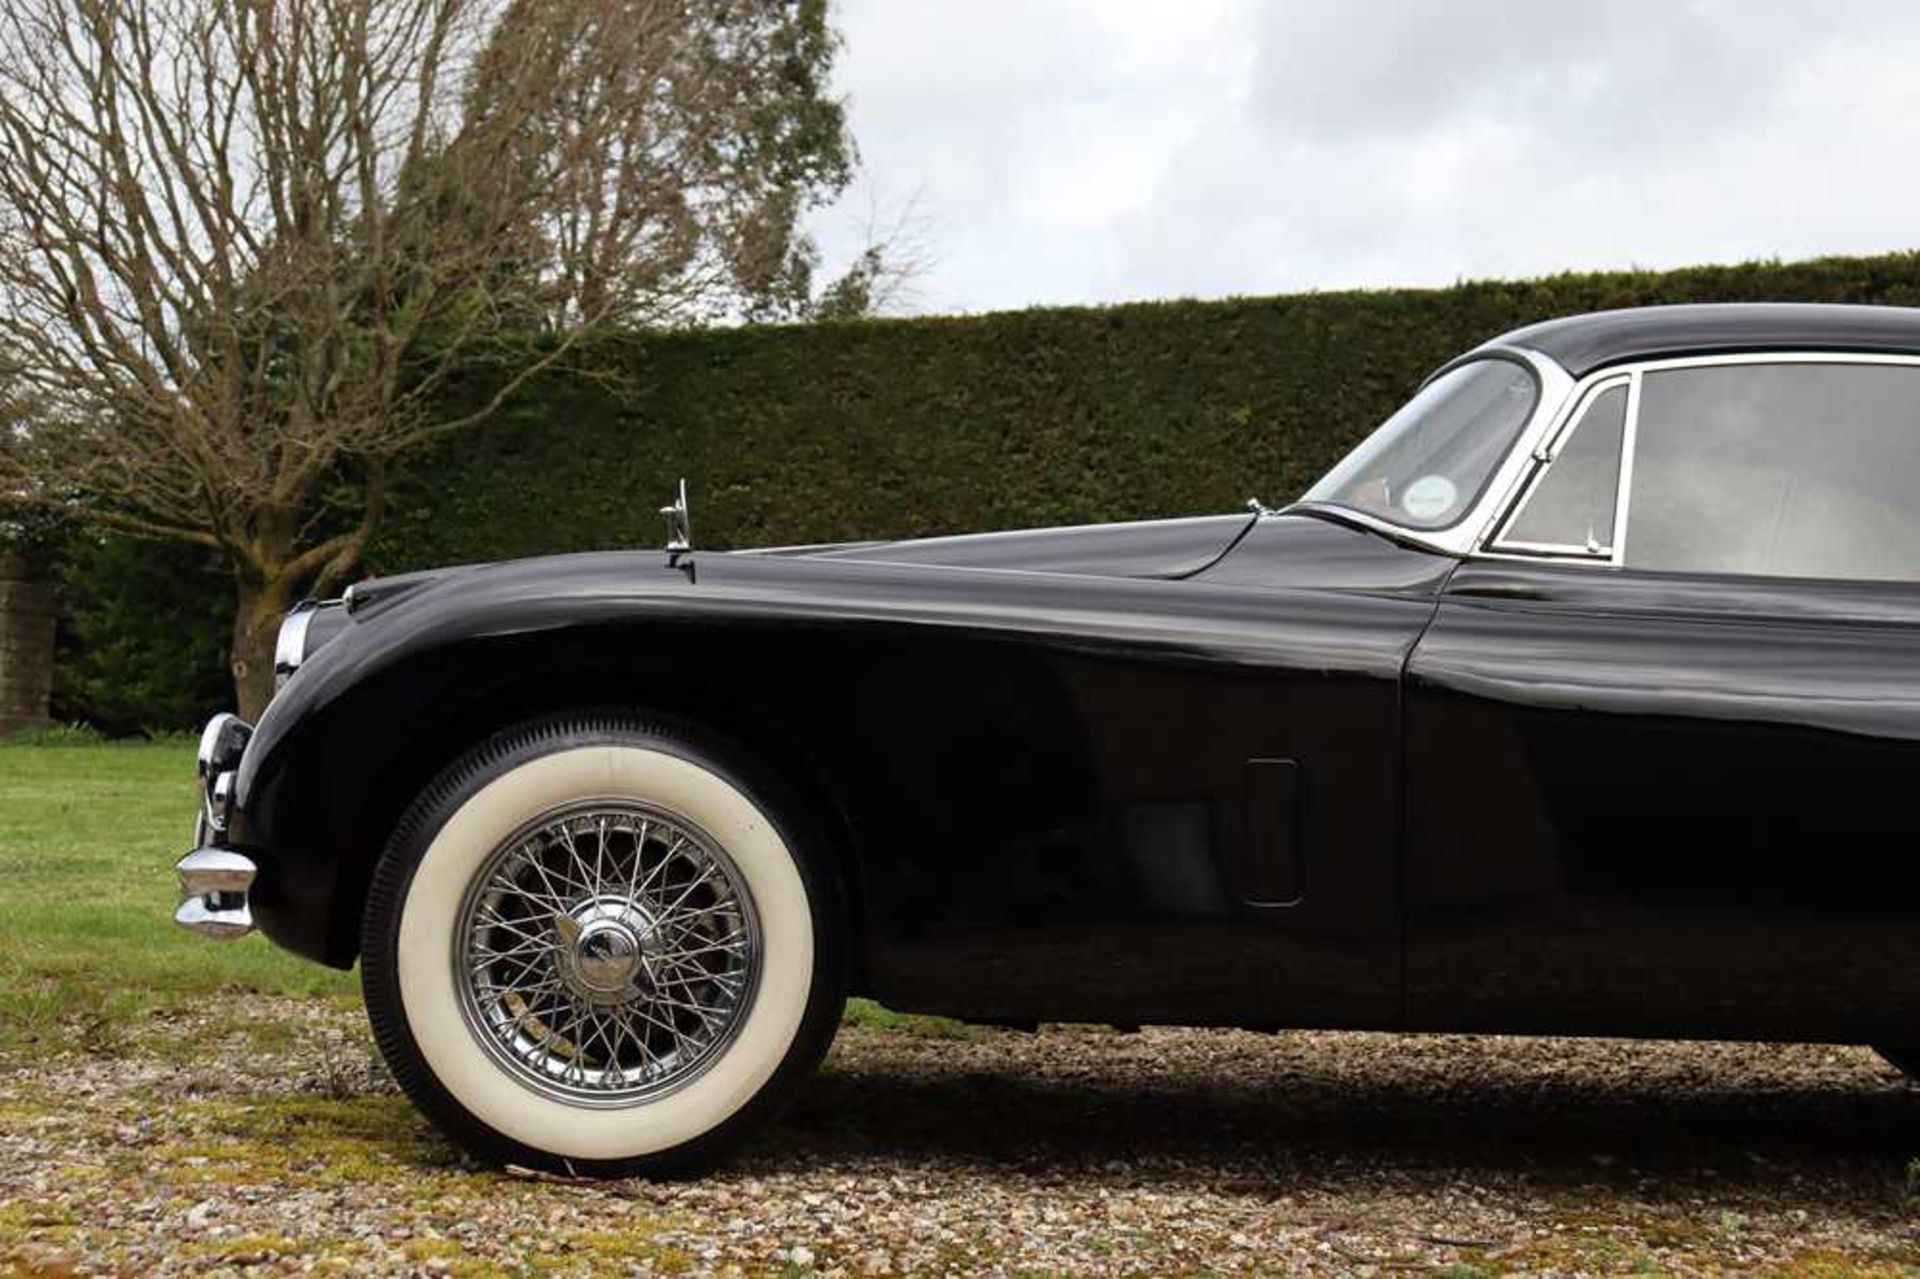 1959 Jaguar XK 150 Fixed Head Coupe 1 of just 1,368 RHD examples made - Image 41 of 49